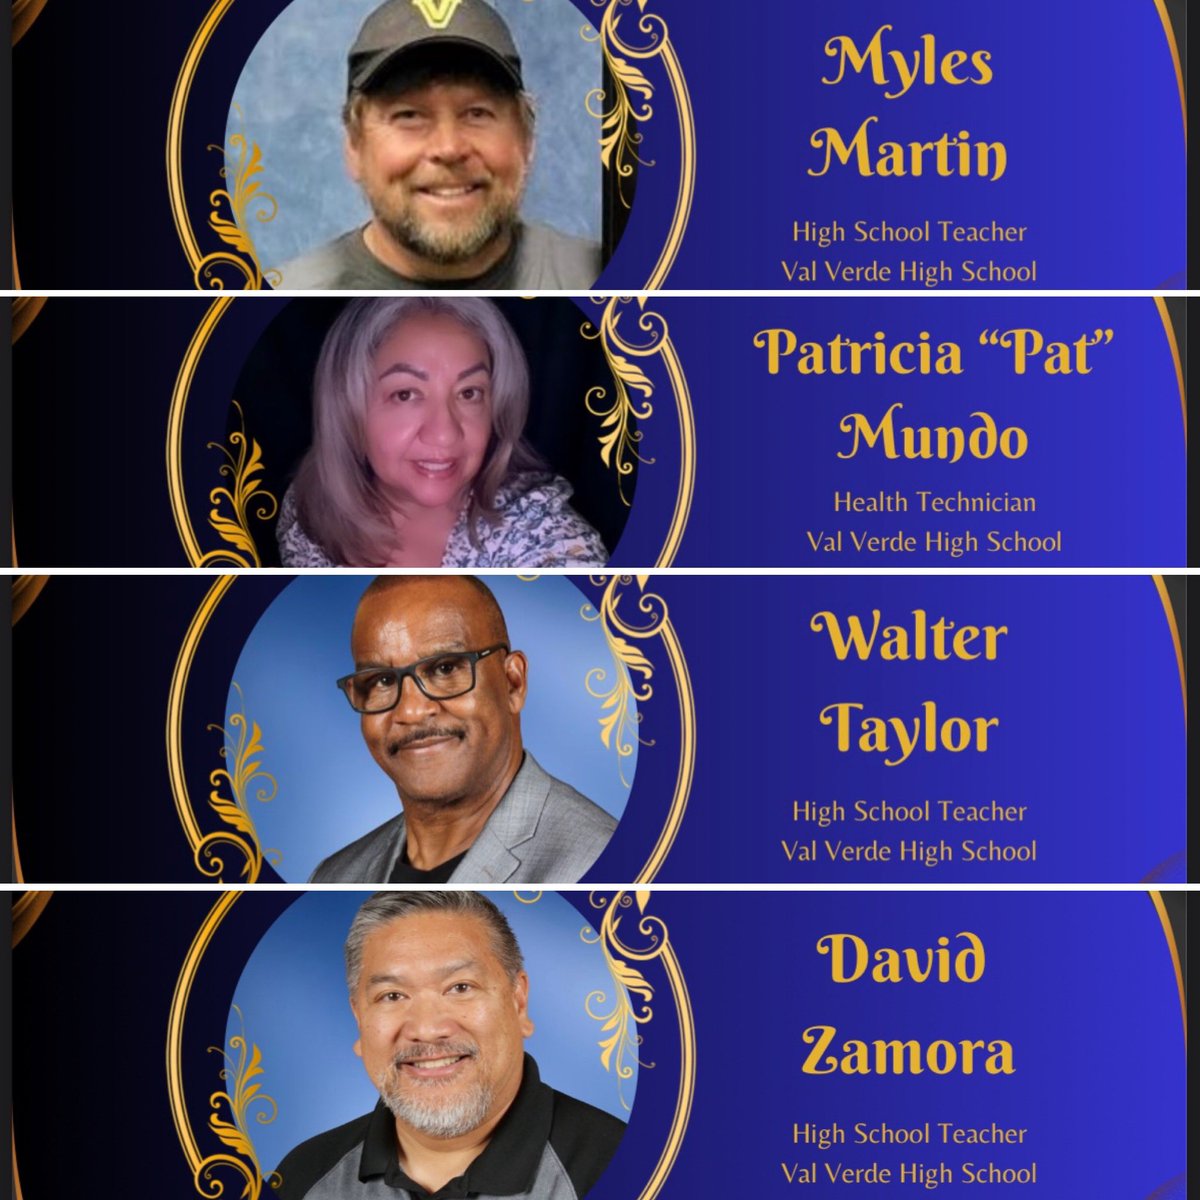 Congratulations to our VVHS retirees. Thank you for your service! Best wishes! 👏🏽👏🏽👏🏽💛🖤💛👏🏽👏🏽👏🏽